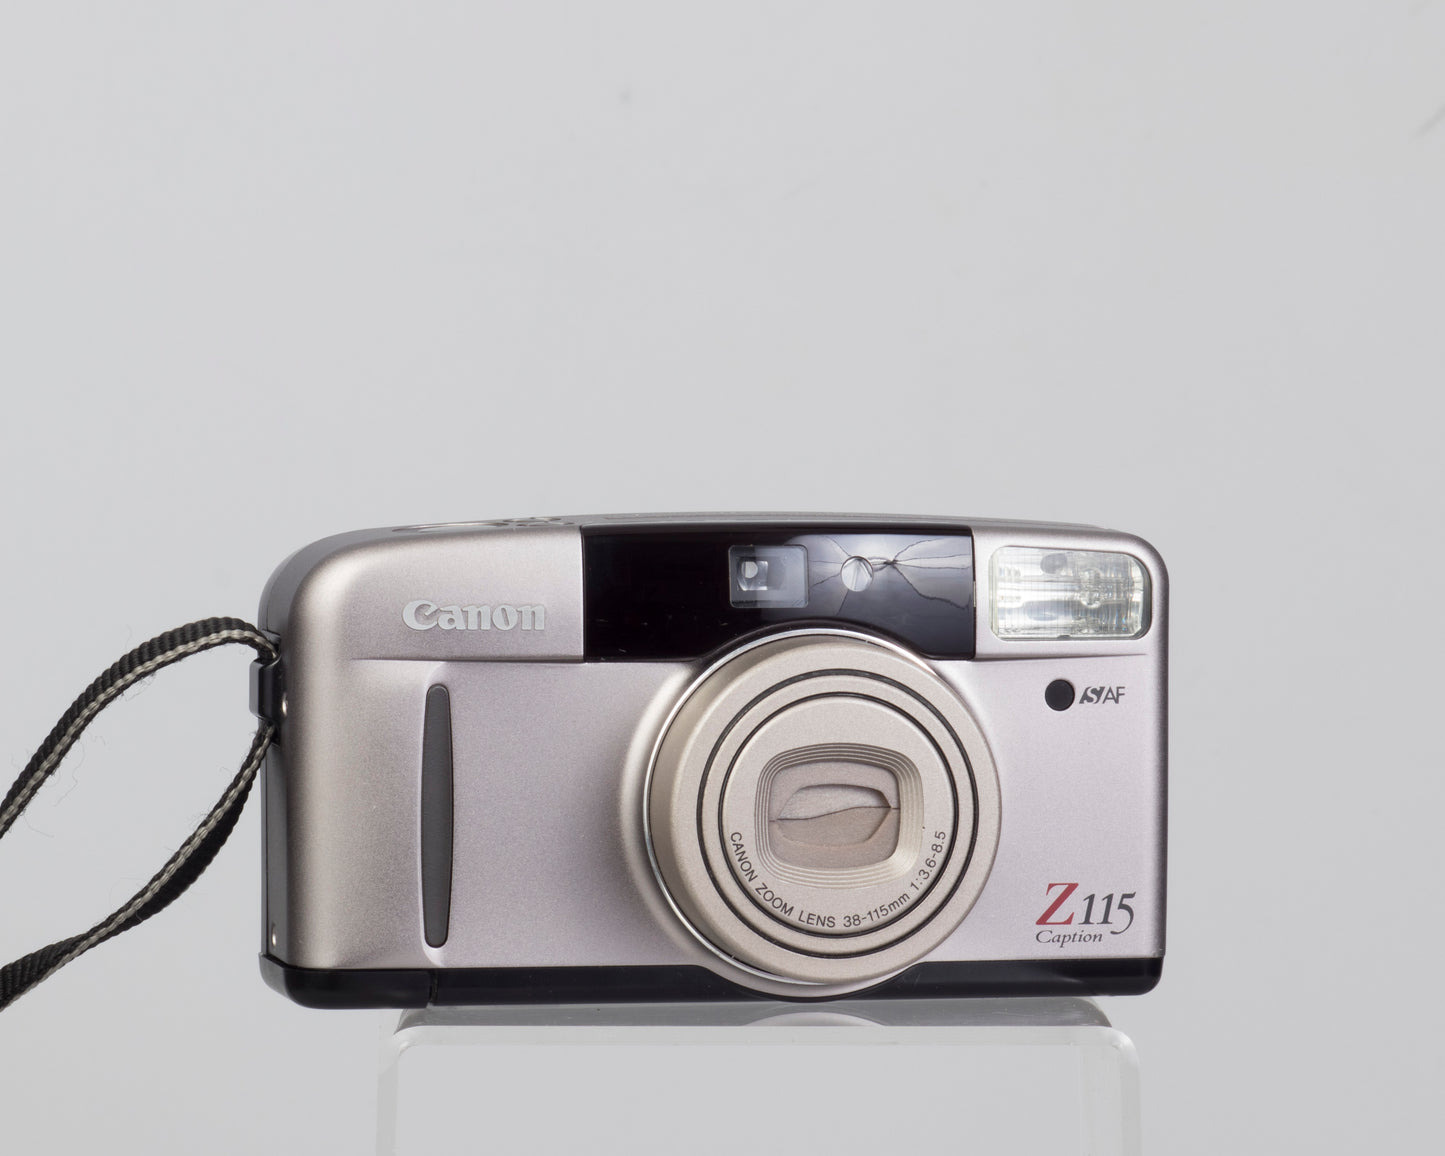 The Canon Sure Z115 was the company's top of the line 35mm point-and-shoot camera from the 1990s (shown switched off)